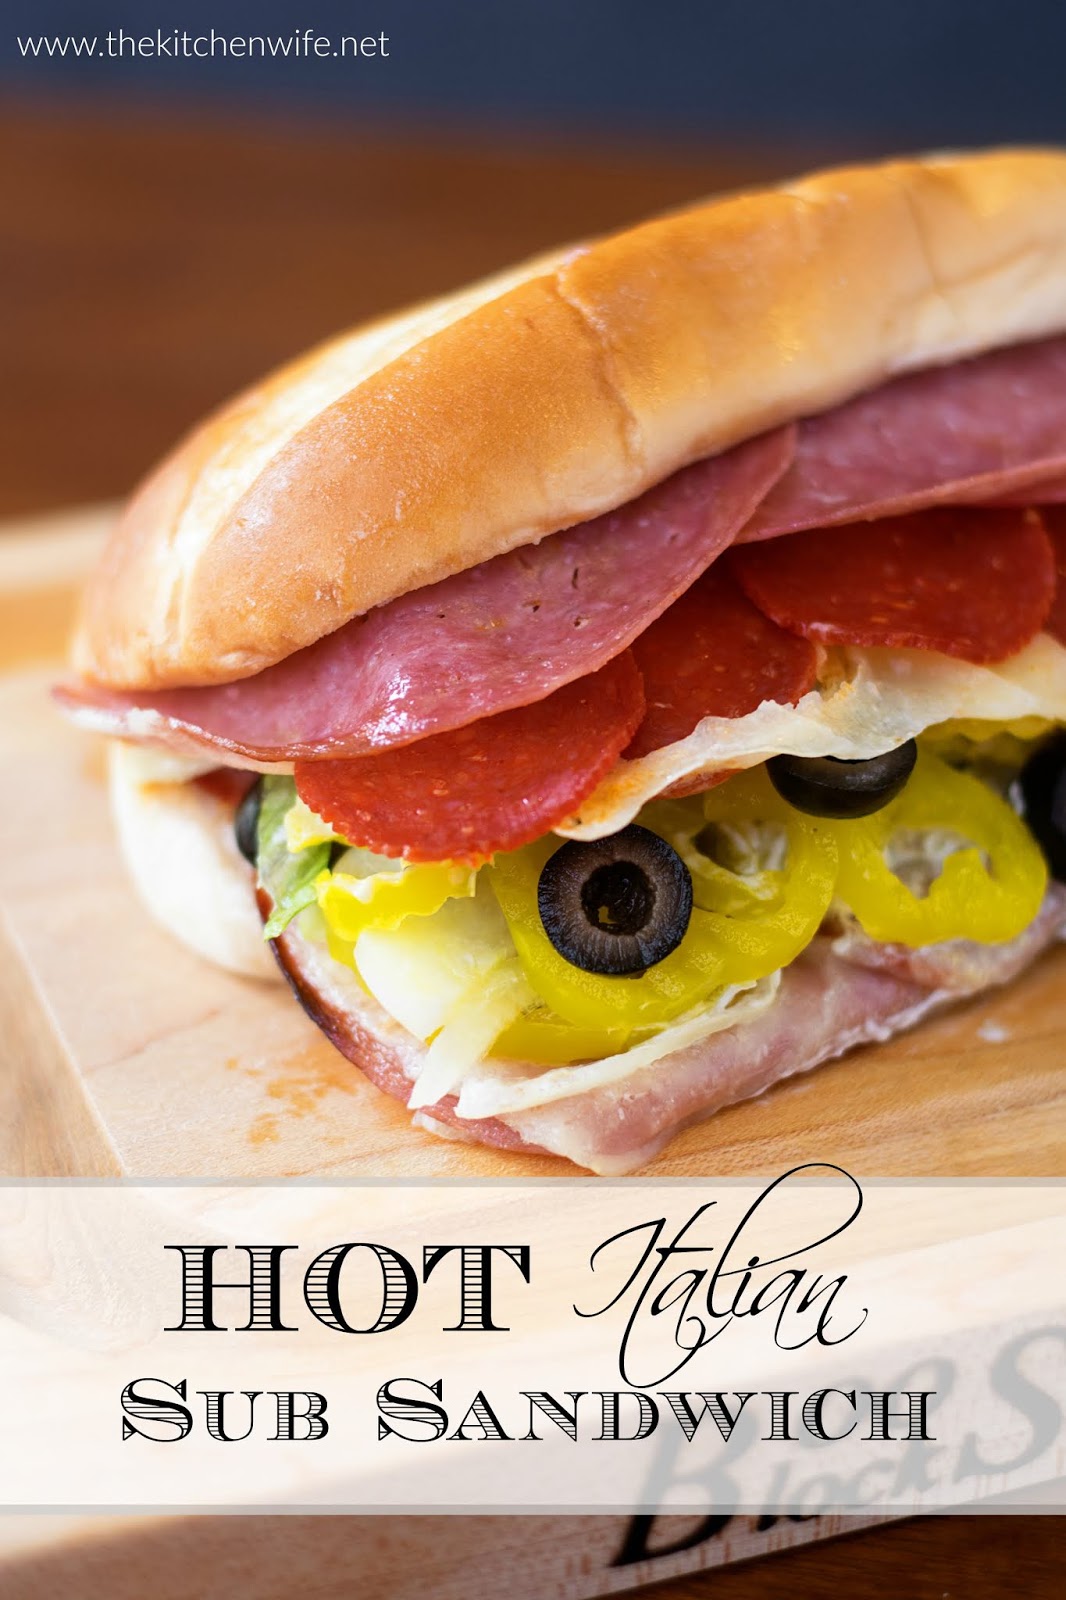 How to Make a Hot Italian Sub Sandwich Recipe - The Kitchen Wife